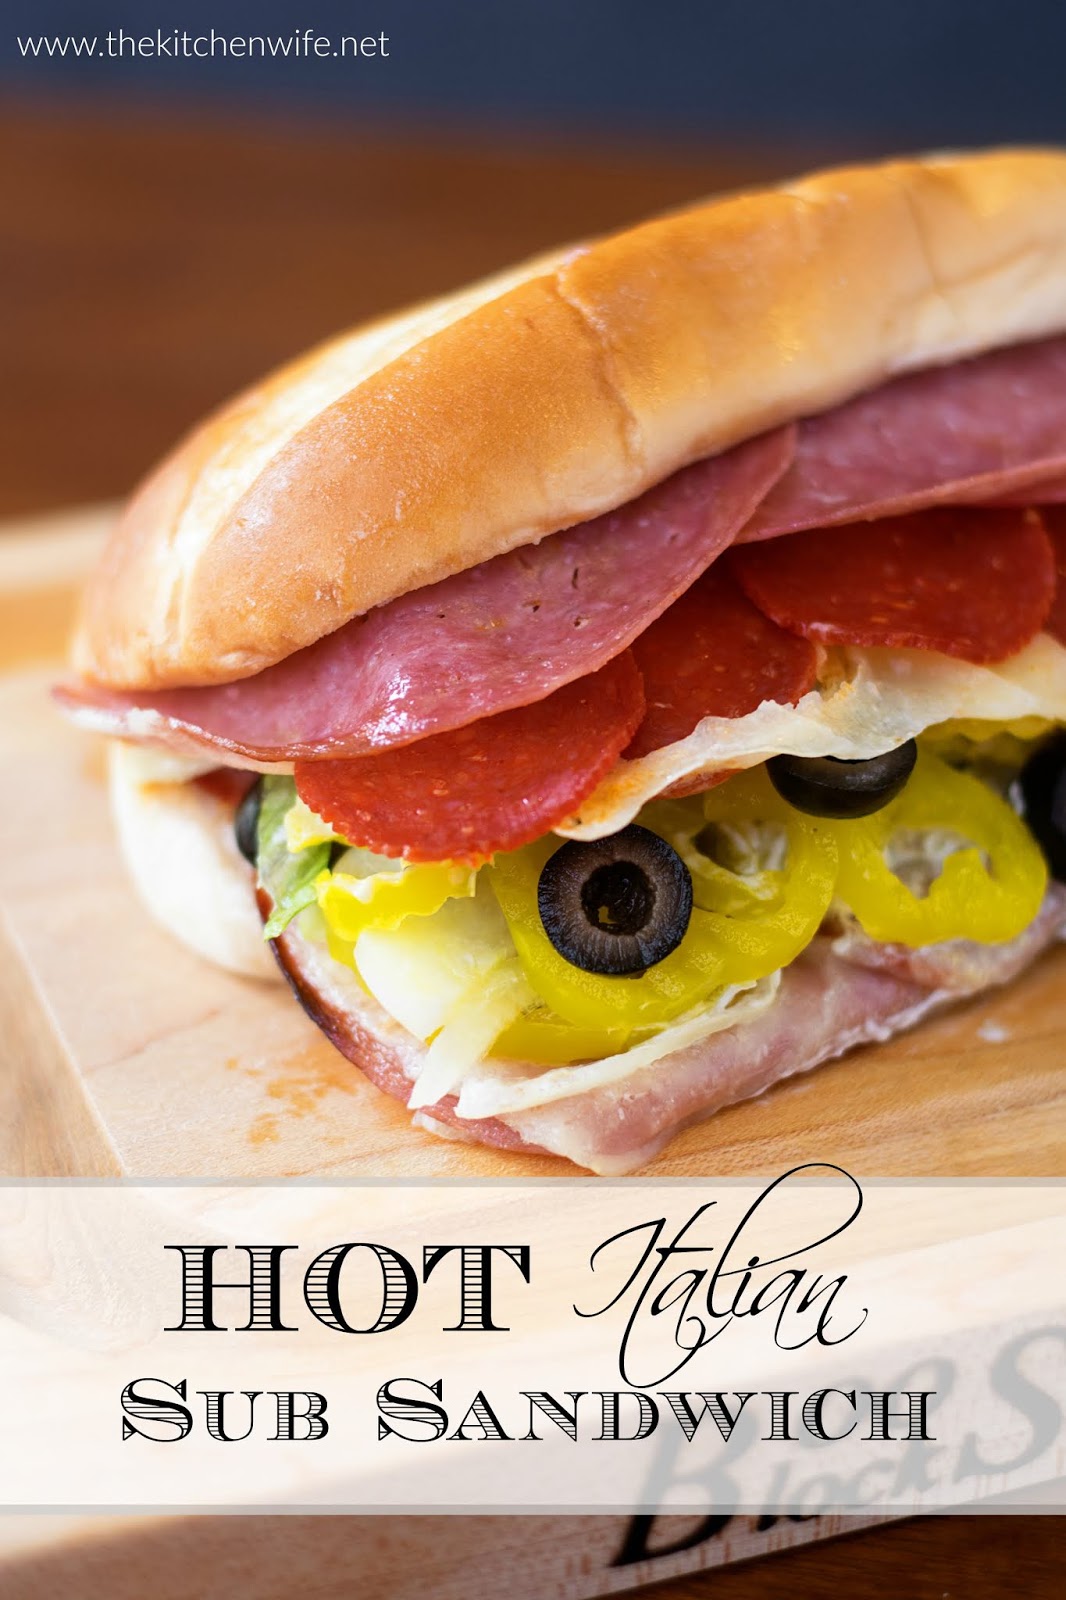 How to Make a Hot Italian Sub Sandwich Recipe - The Kitchen Wife